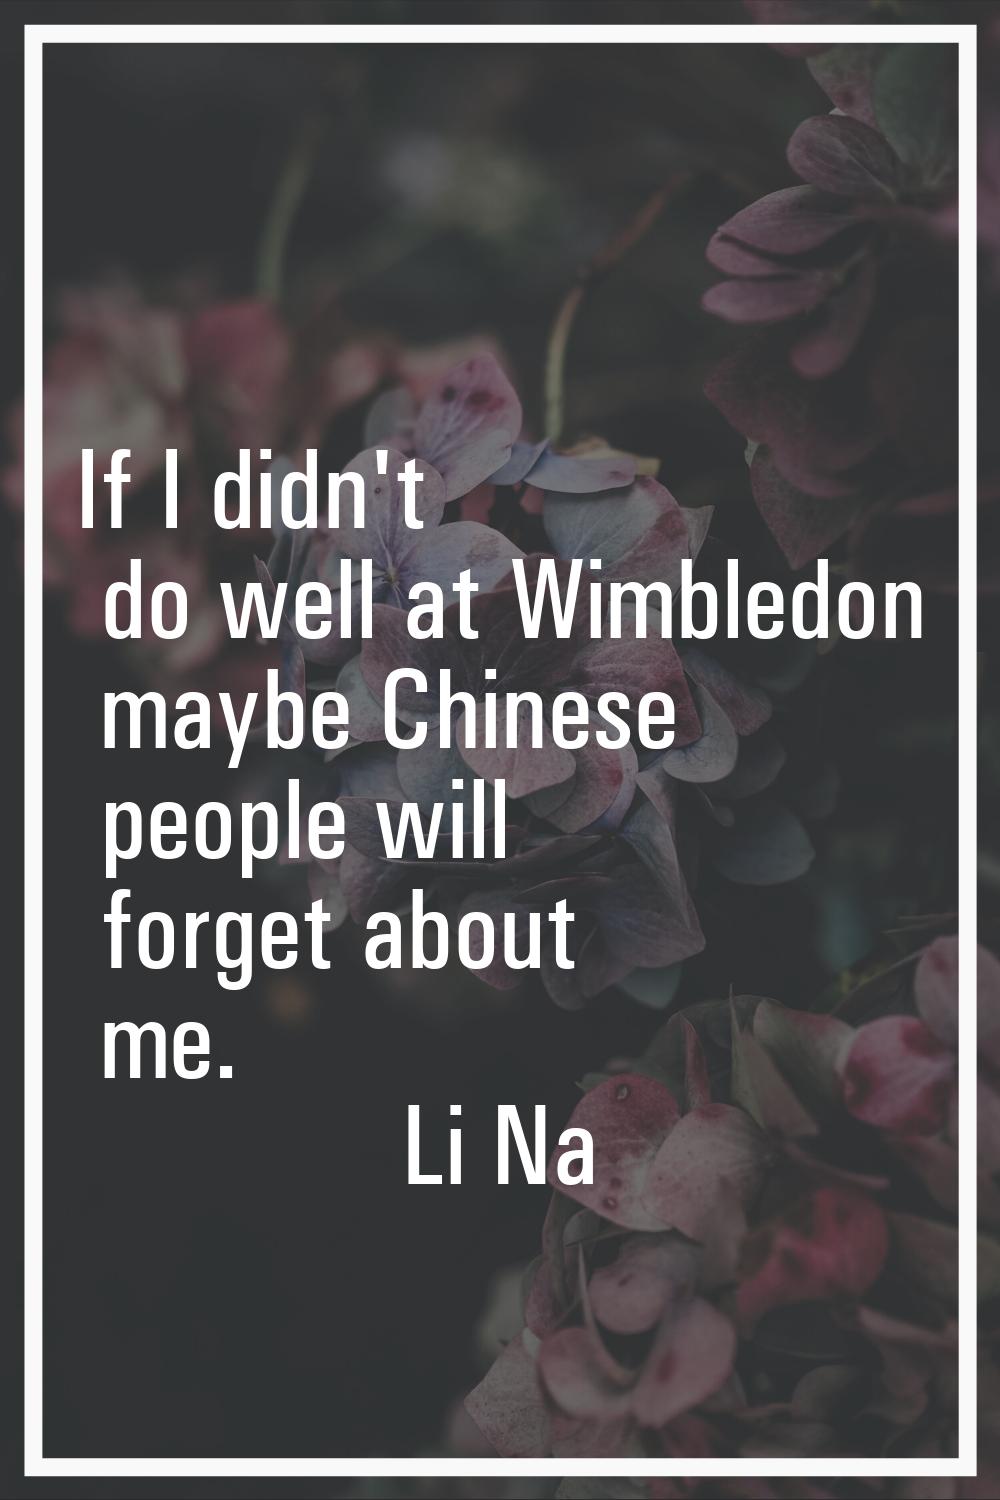 If I didn't do well at Wimbledon maybe Chinese people will forget about me.